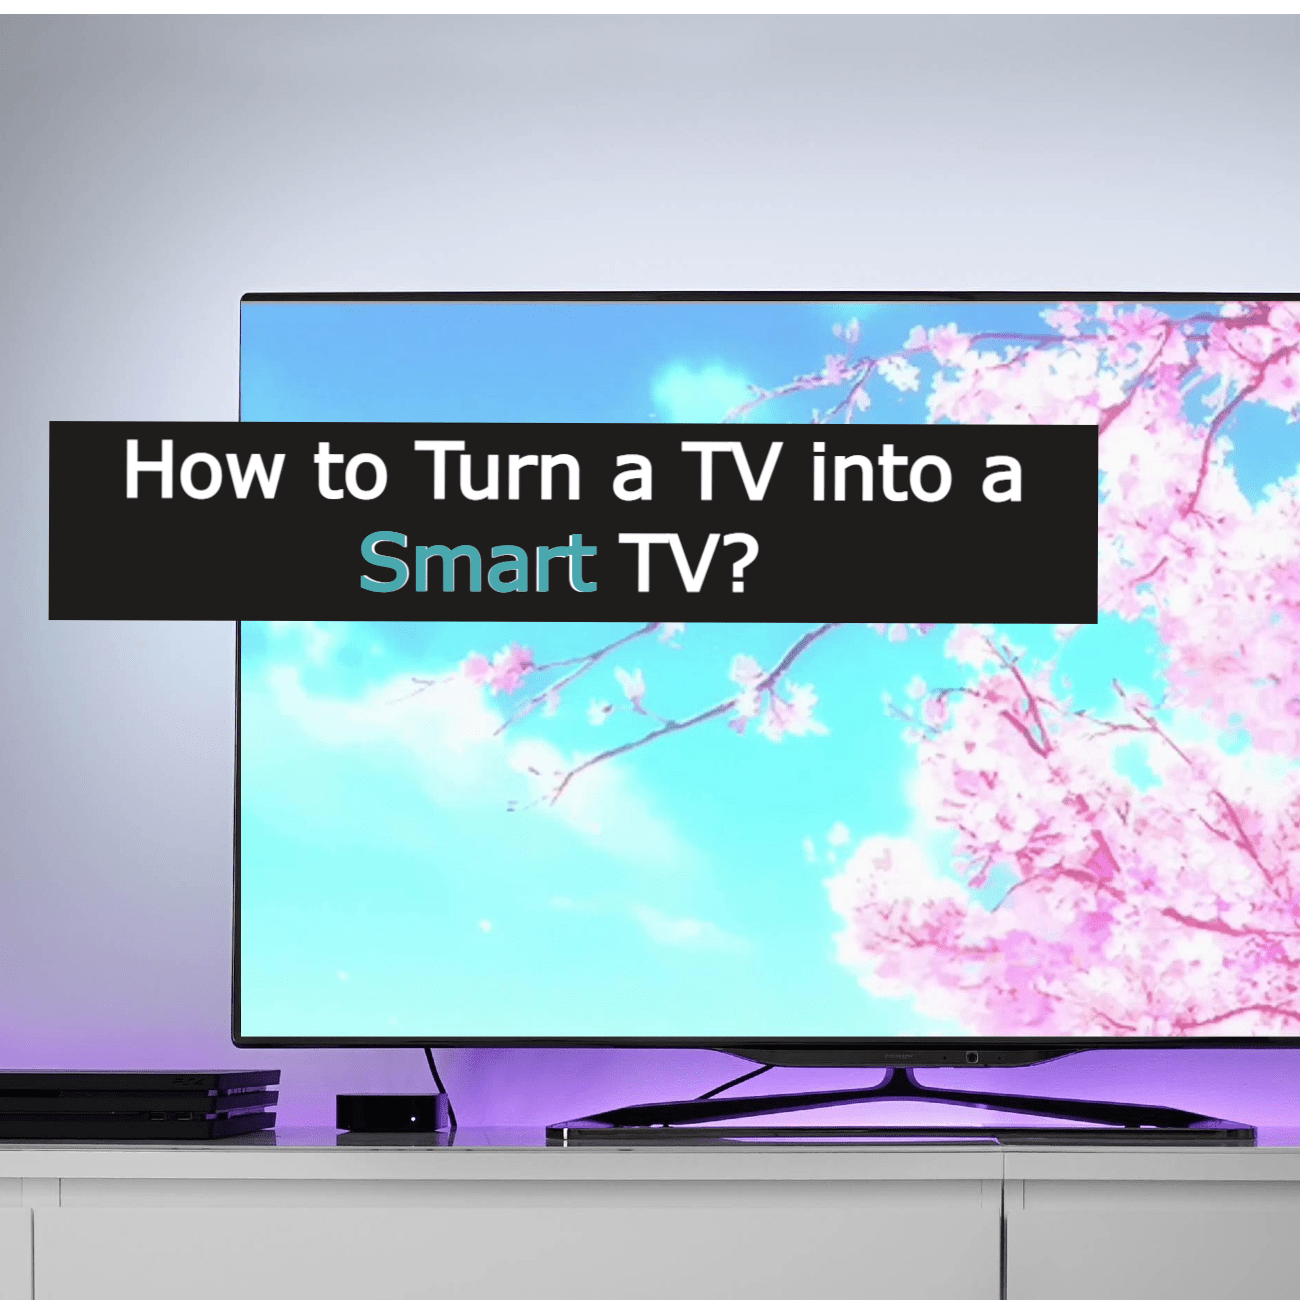 How to Turn TV into Smart TV in 2021 [Guide]